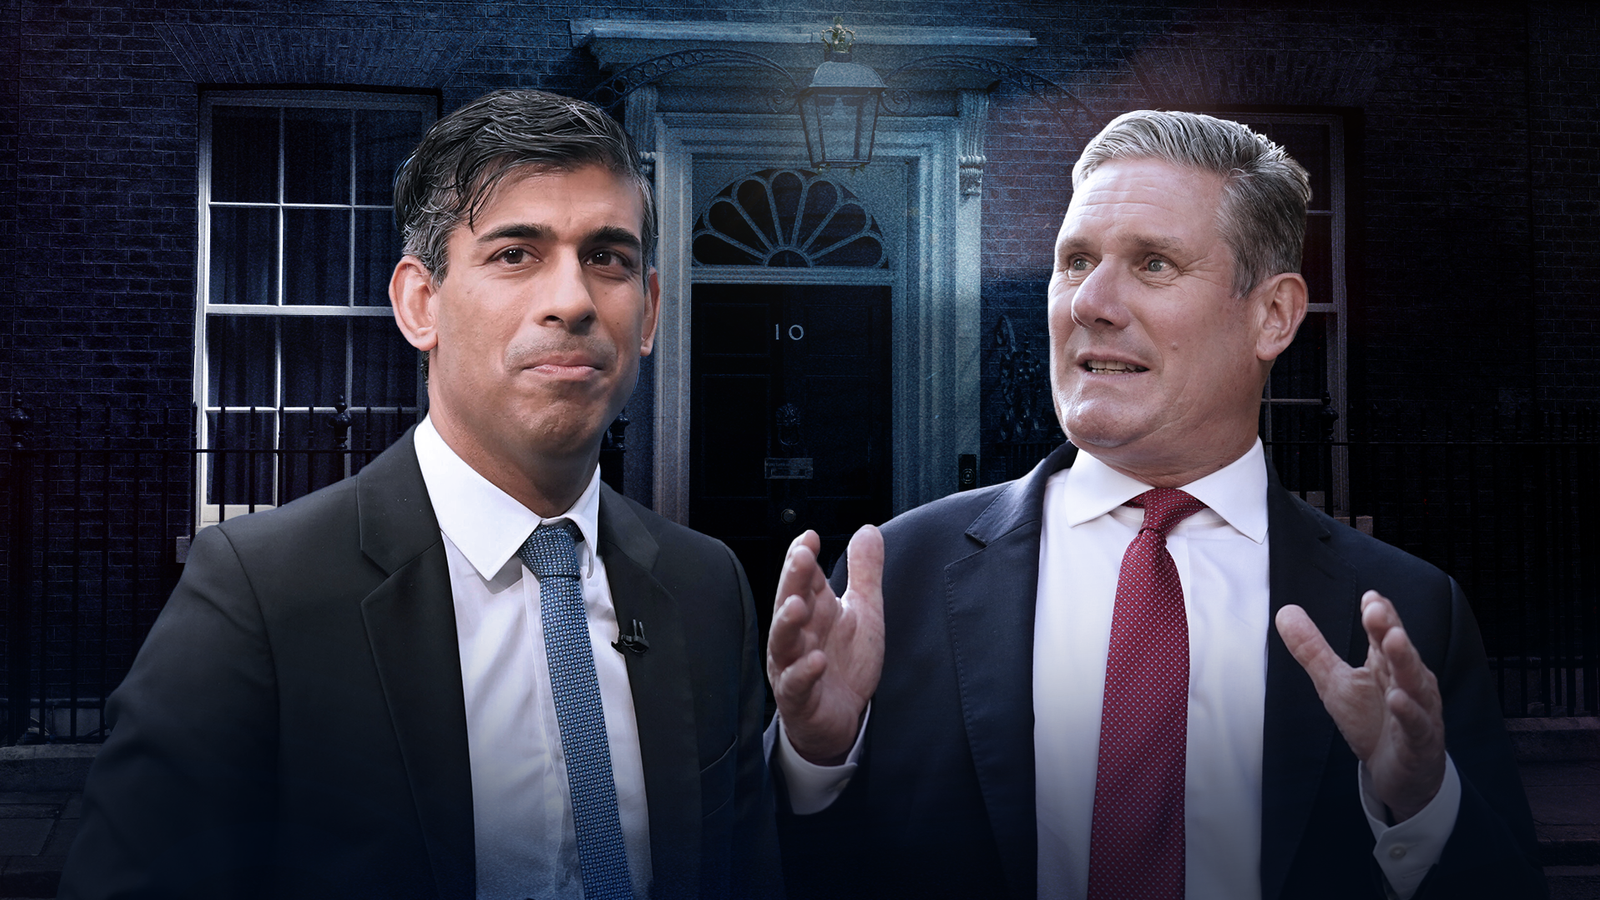 Adam Boulton: A PM in waiting? Why Sunak is getting uptight about Starmer